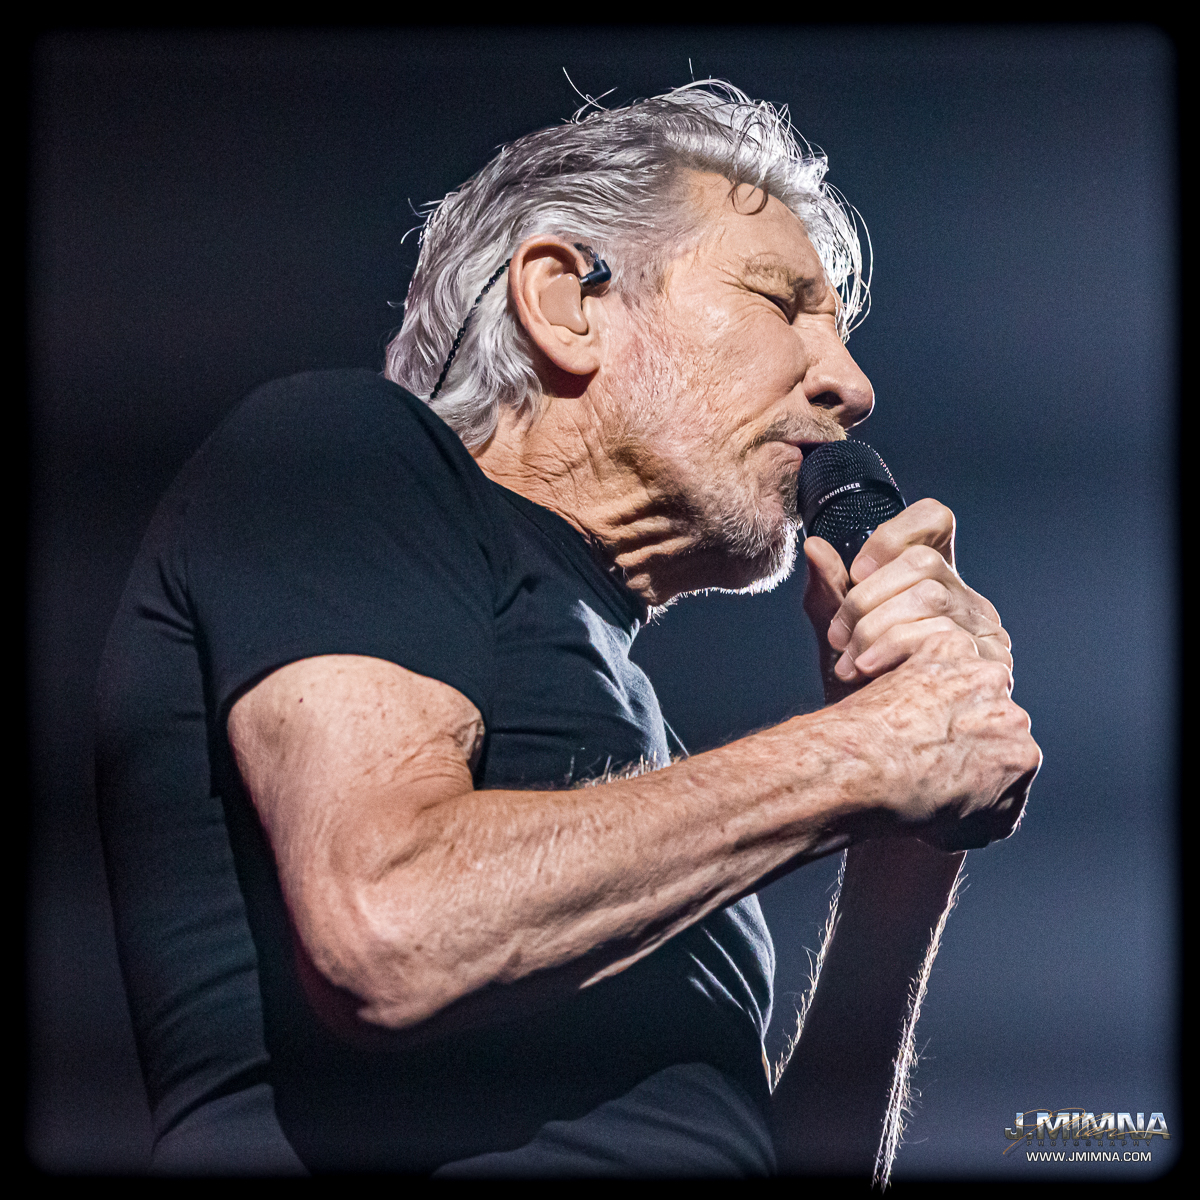 CONCERT REVIEW: ROGER WATERS – 7/20/17 AT NATIONWIDE ARENA, COLUMBUS OHIO